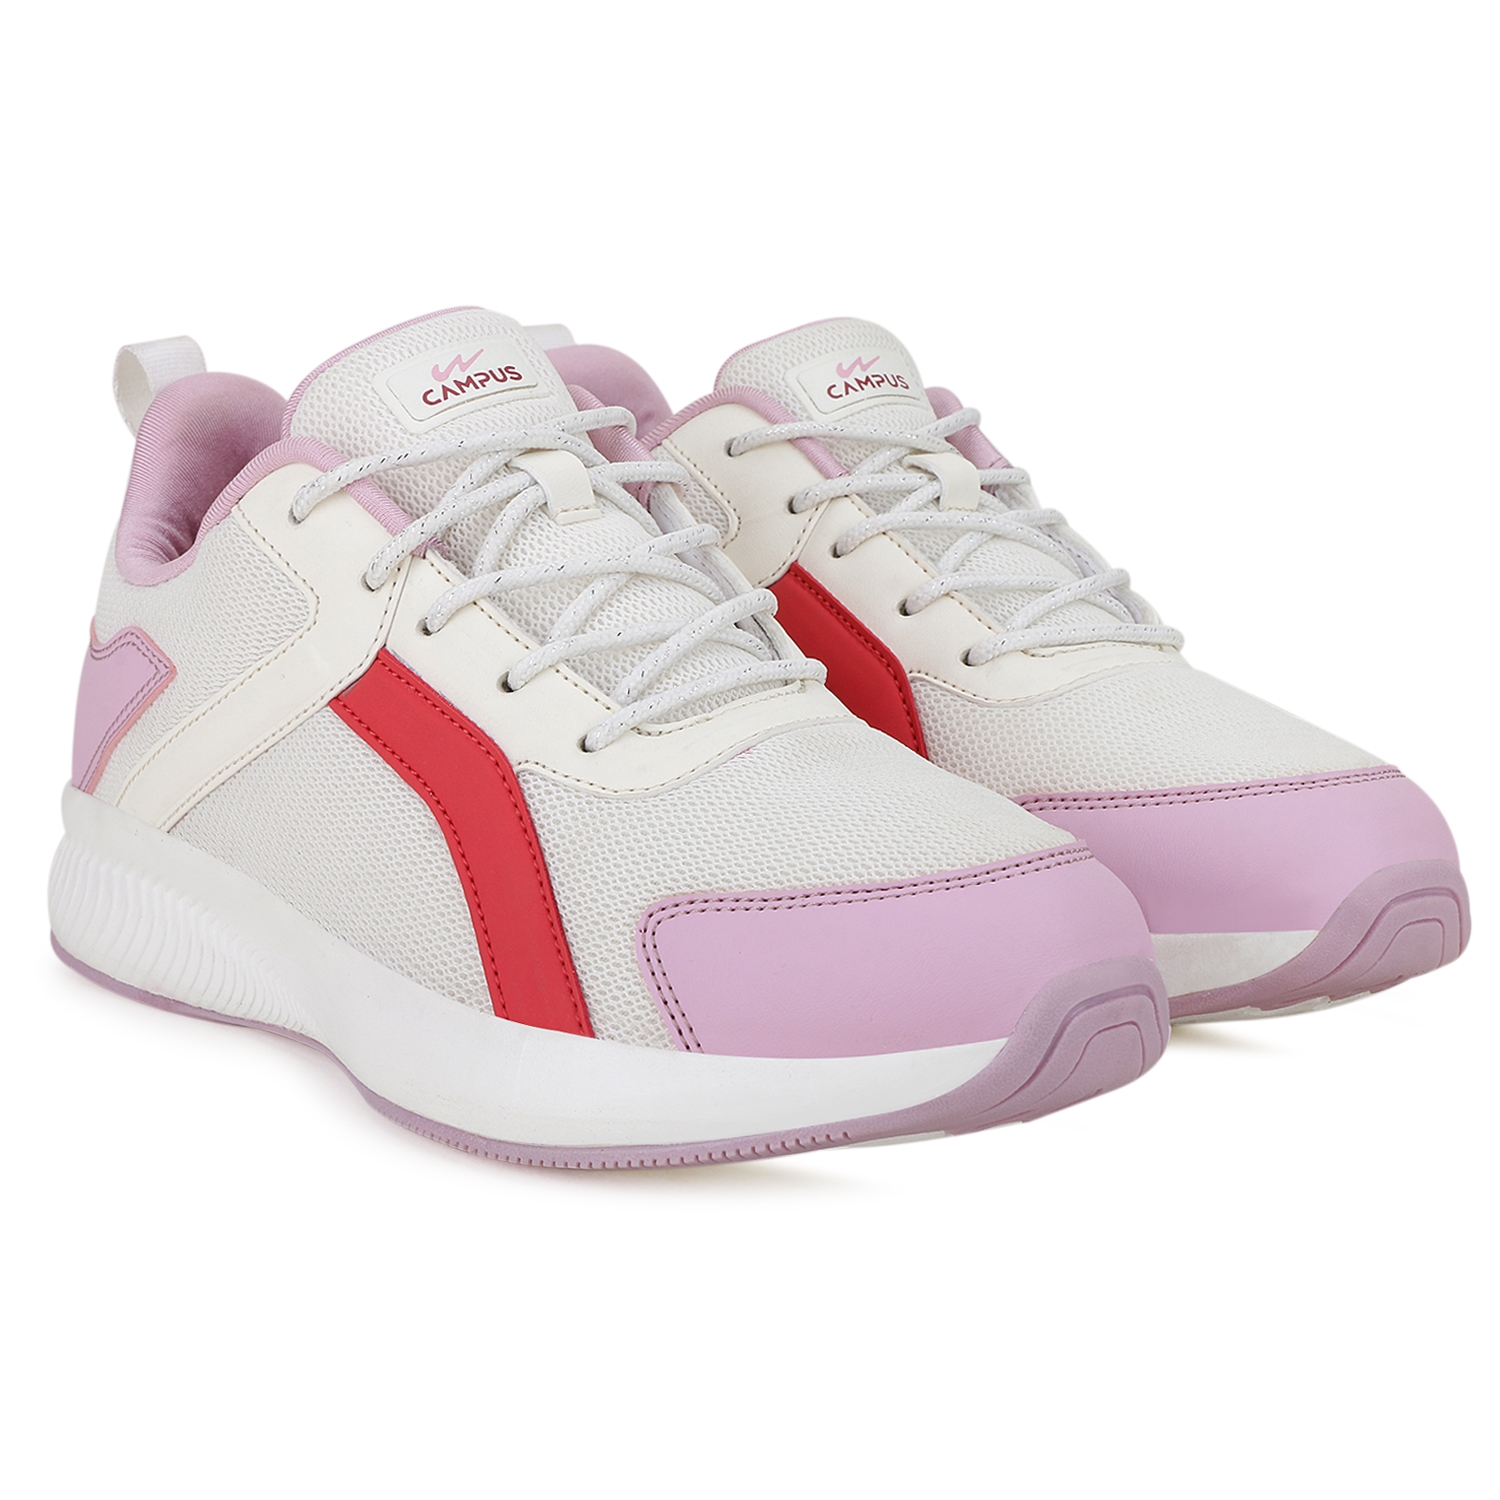 Campus Shoes | White Krystal Running Shoes